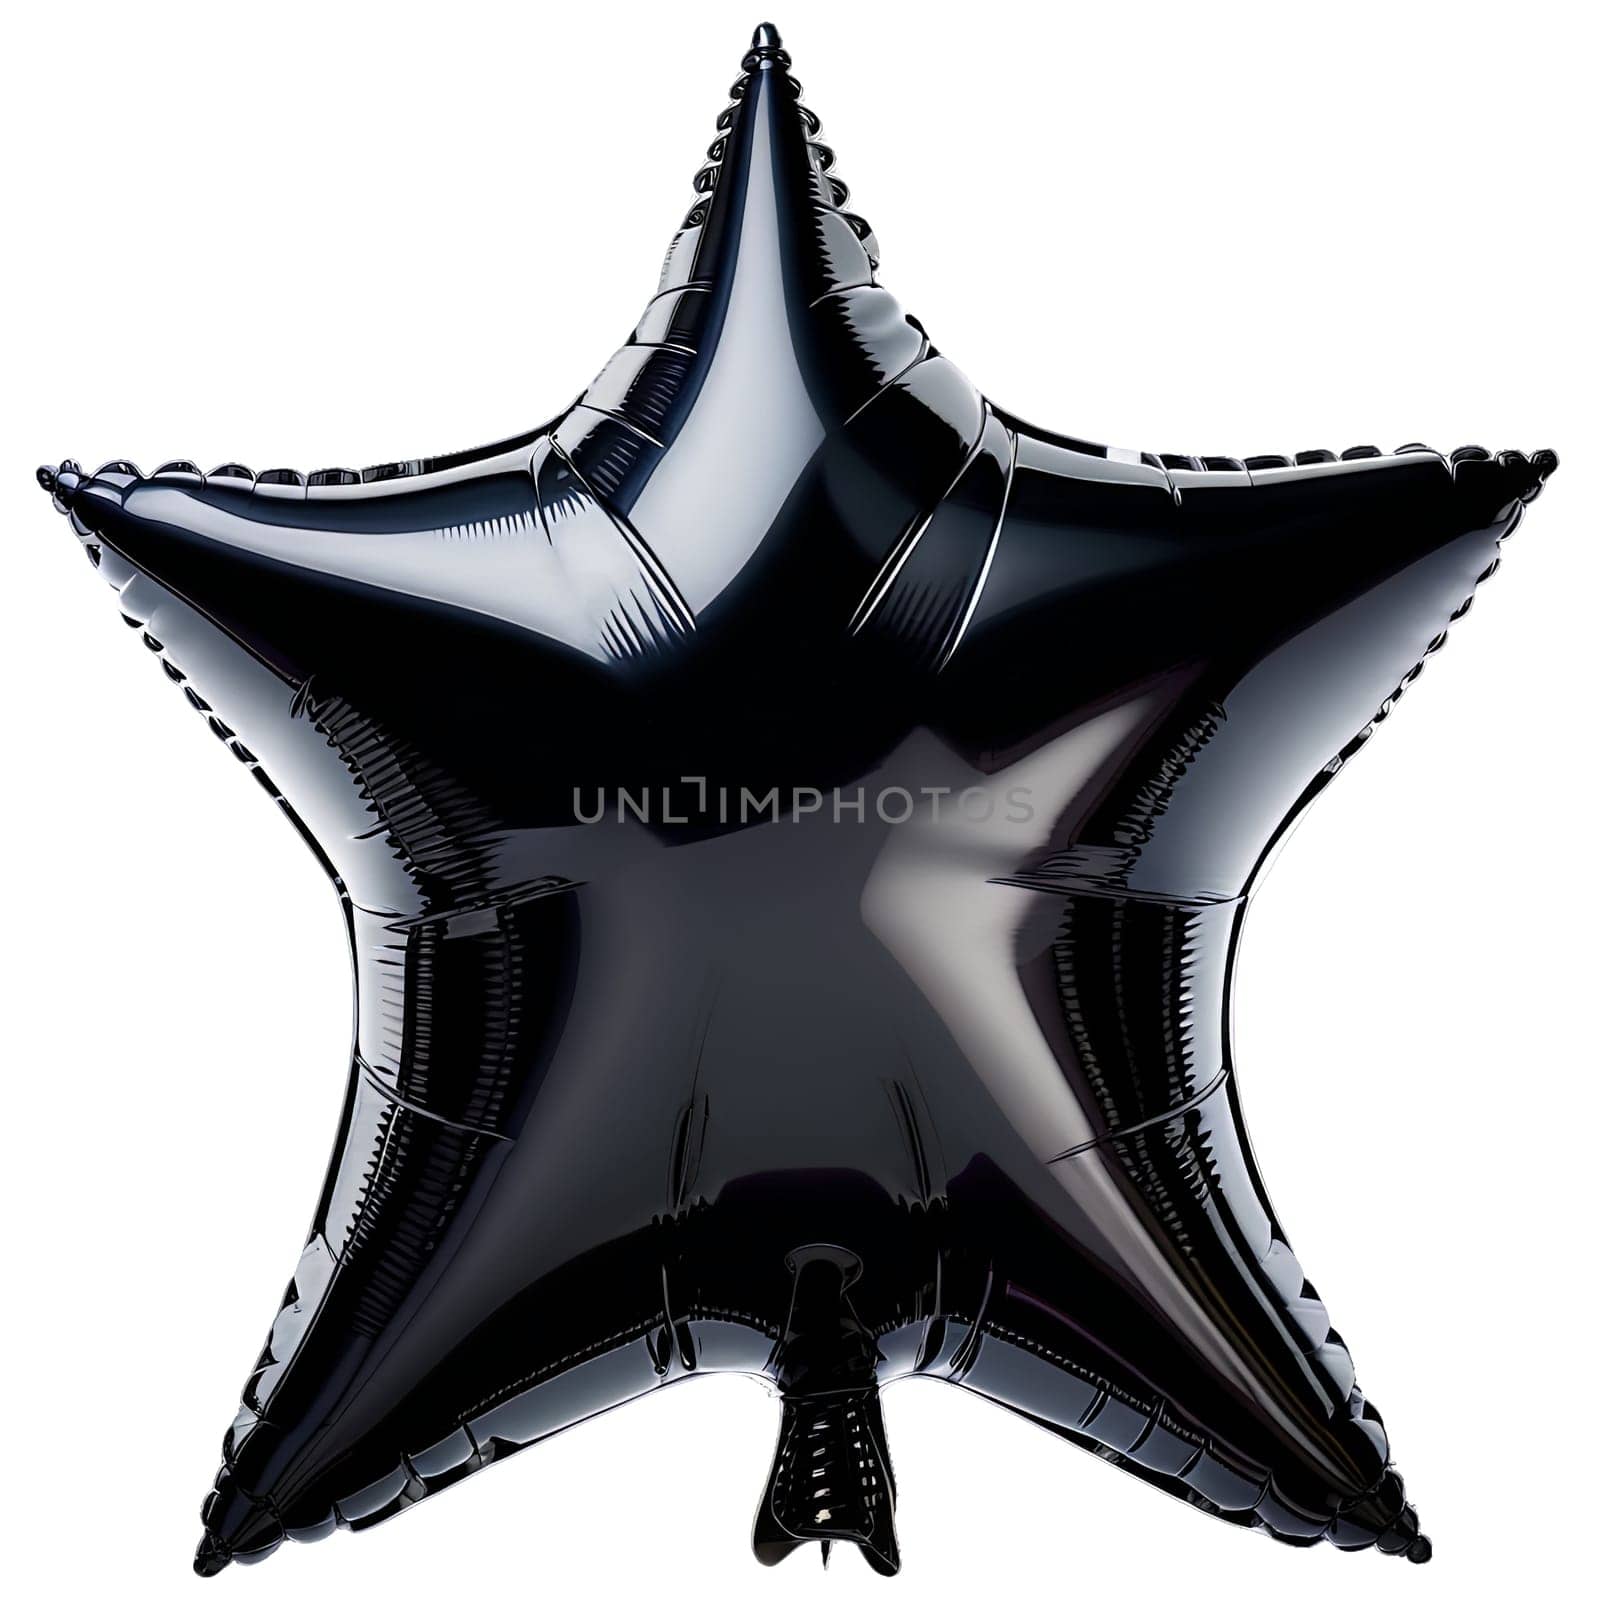 Star-shaped balloon floats against transparent background. Captured during celebration for decorative purpose